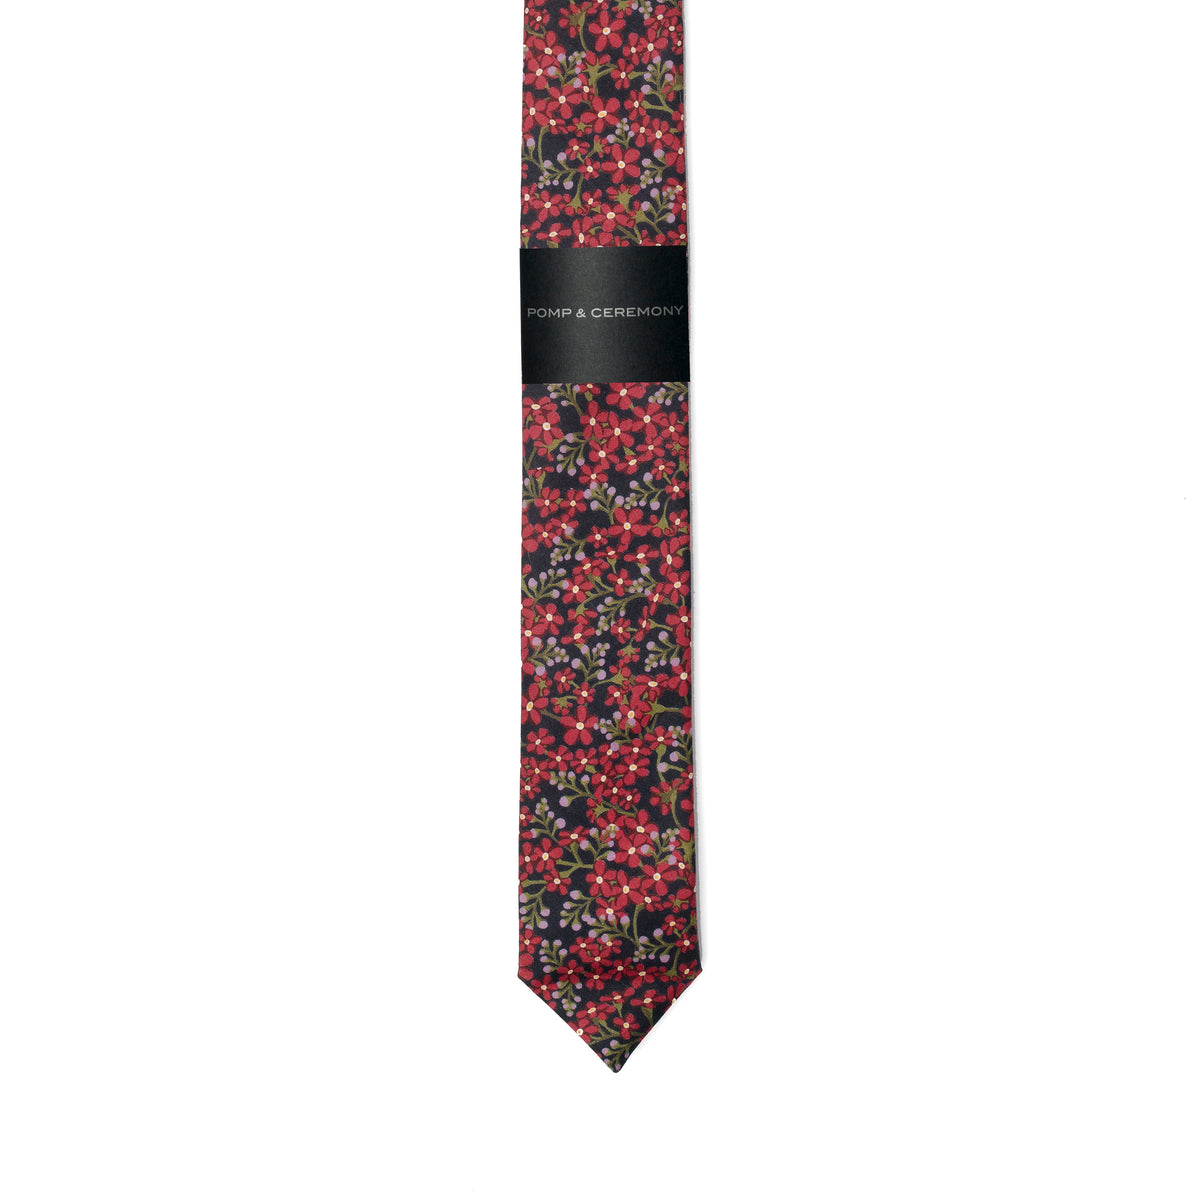 LIBERTY OF LONDON STAR ANISE SKINNY TIE